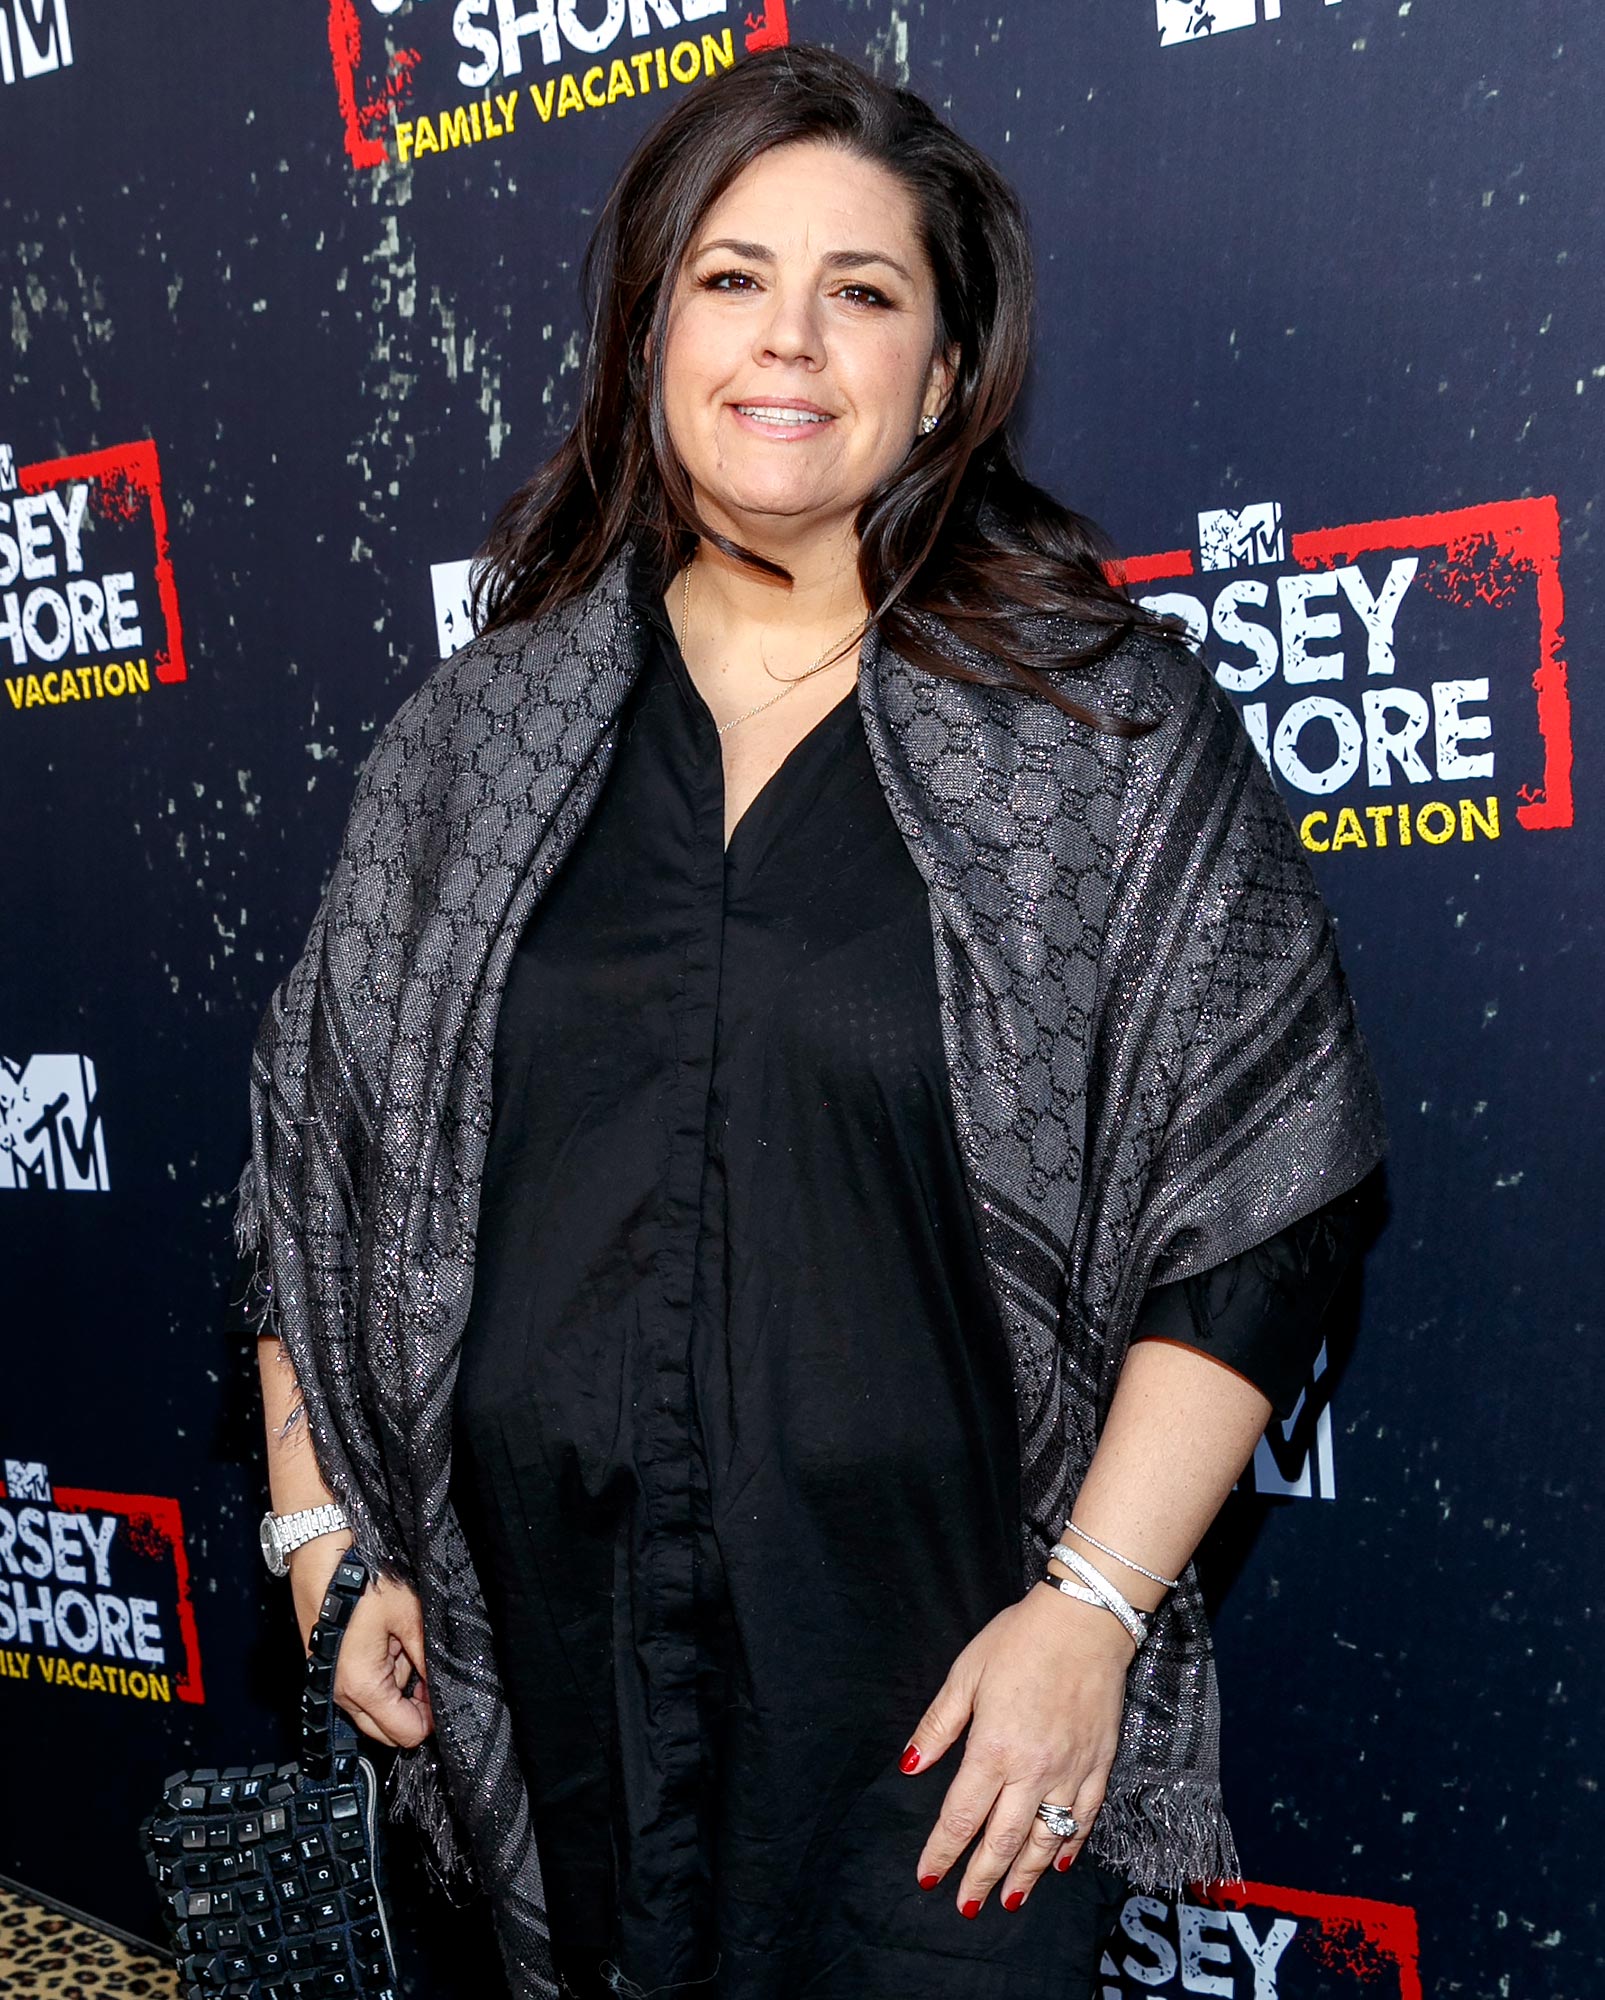 Producer SallyAnn Salsano Answers Reality TV Questions About Casting, Jersey Shore’s Early Days and More